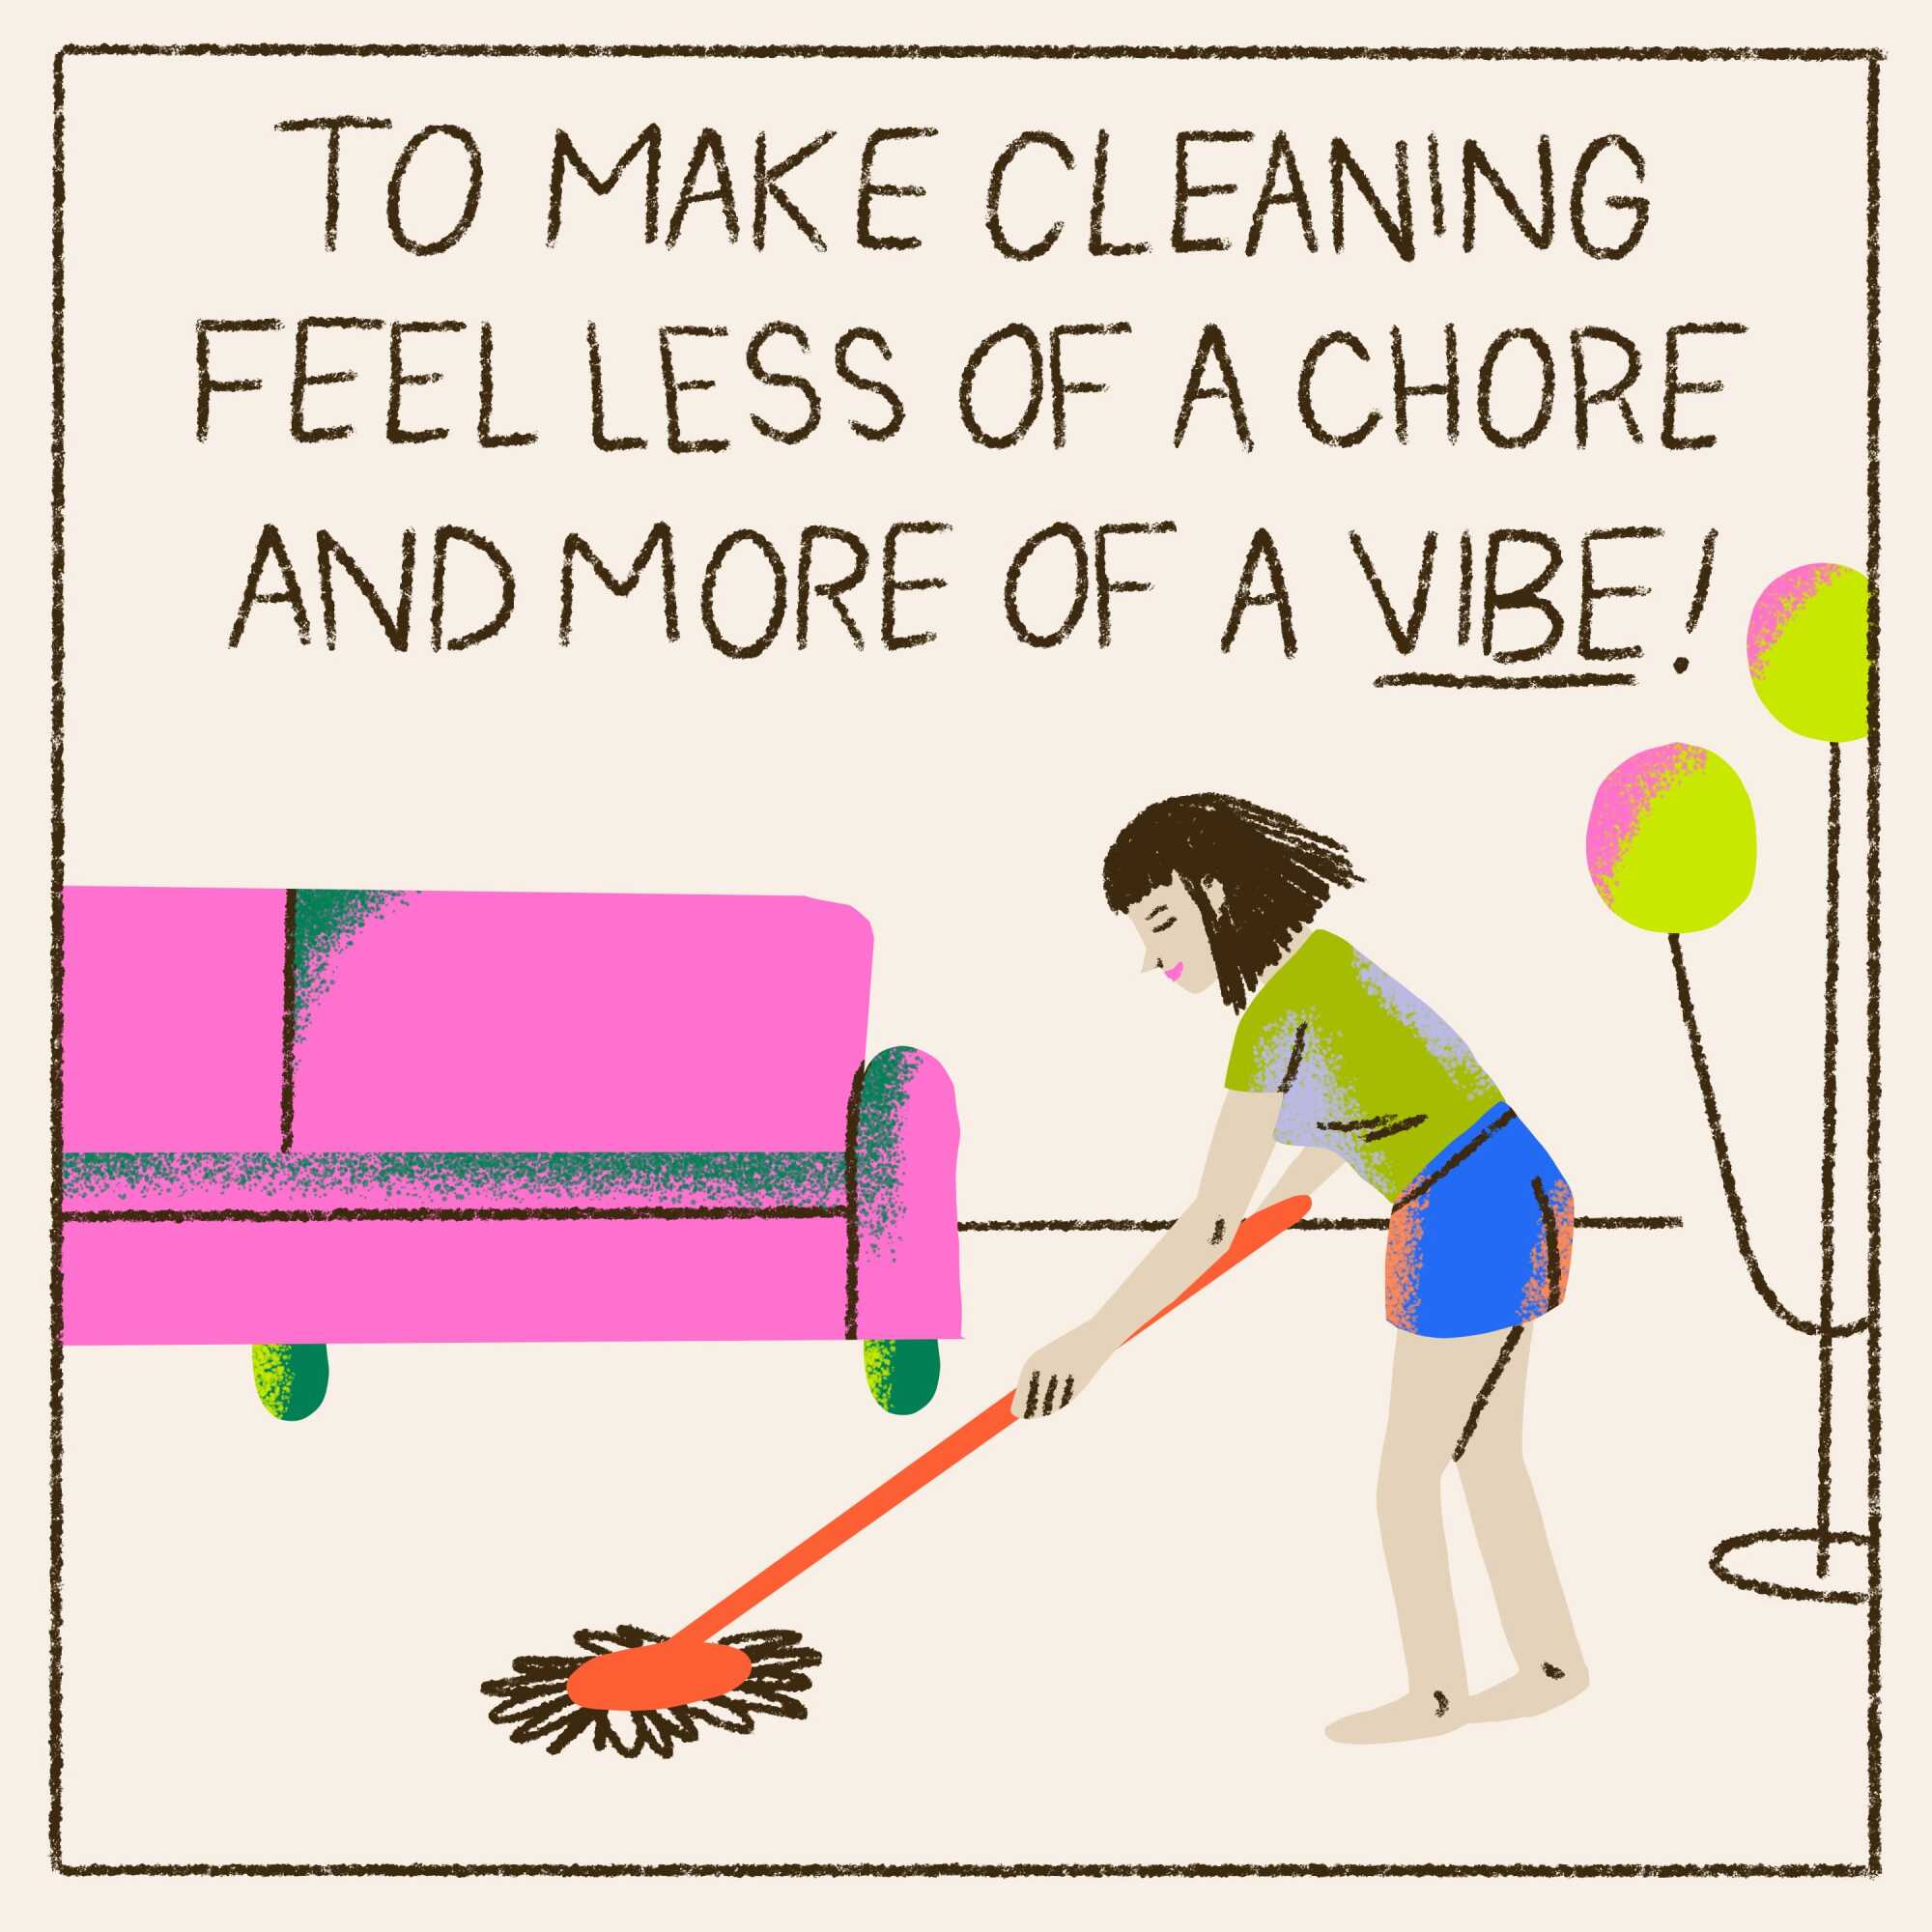 To make cleaning feel less of a chore and more of a vibe!